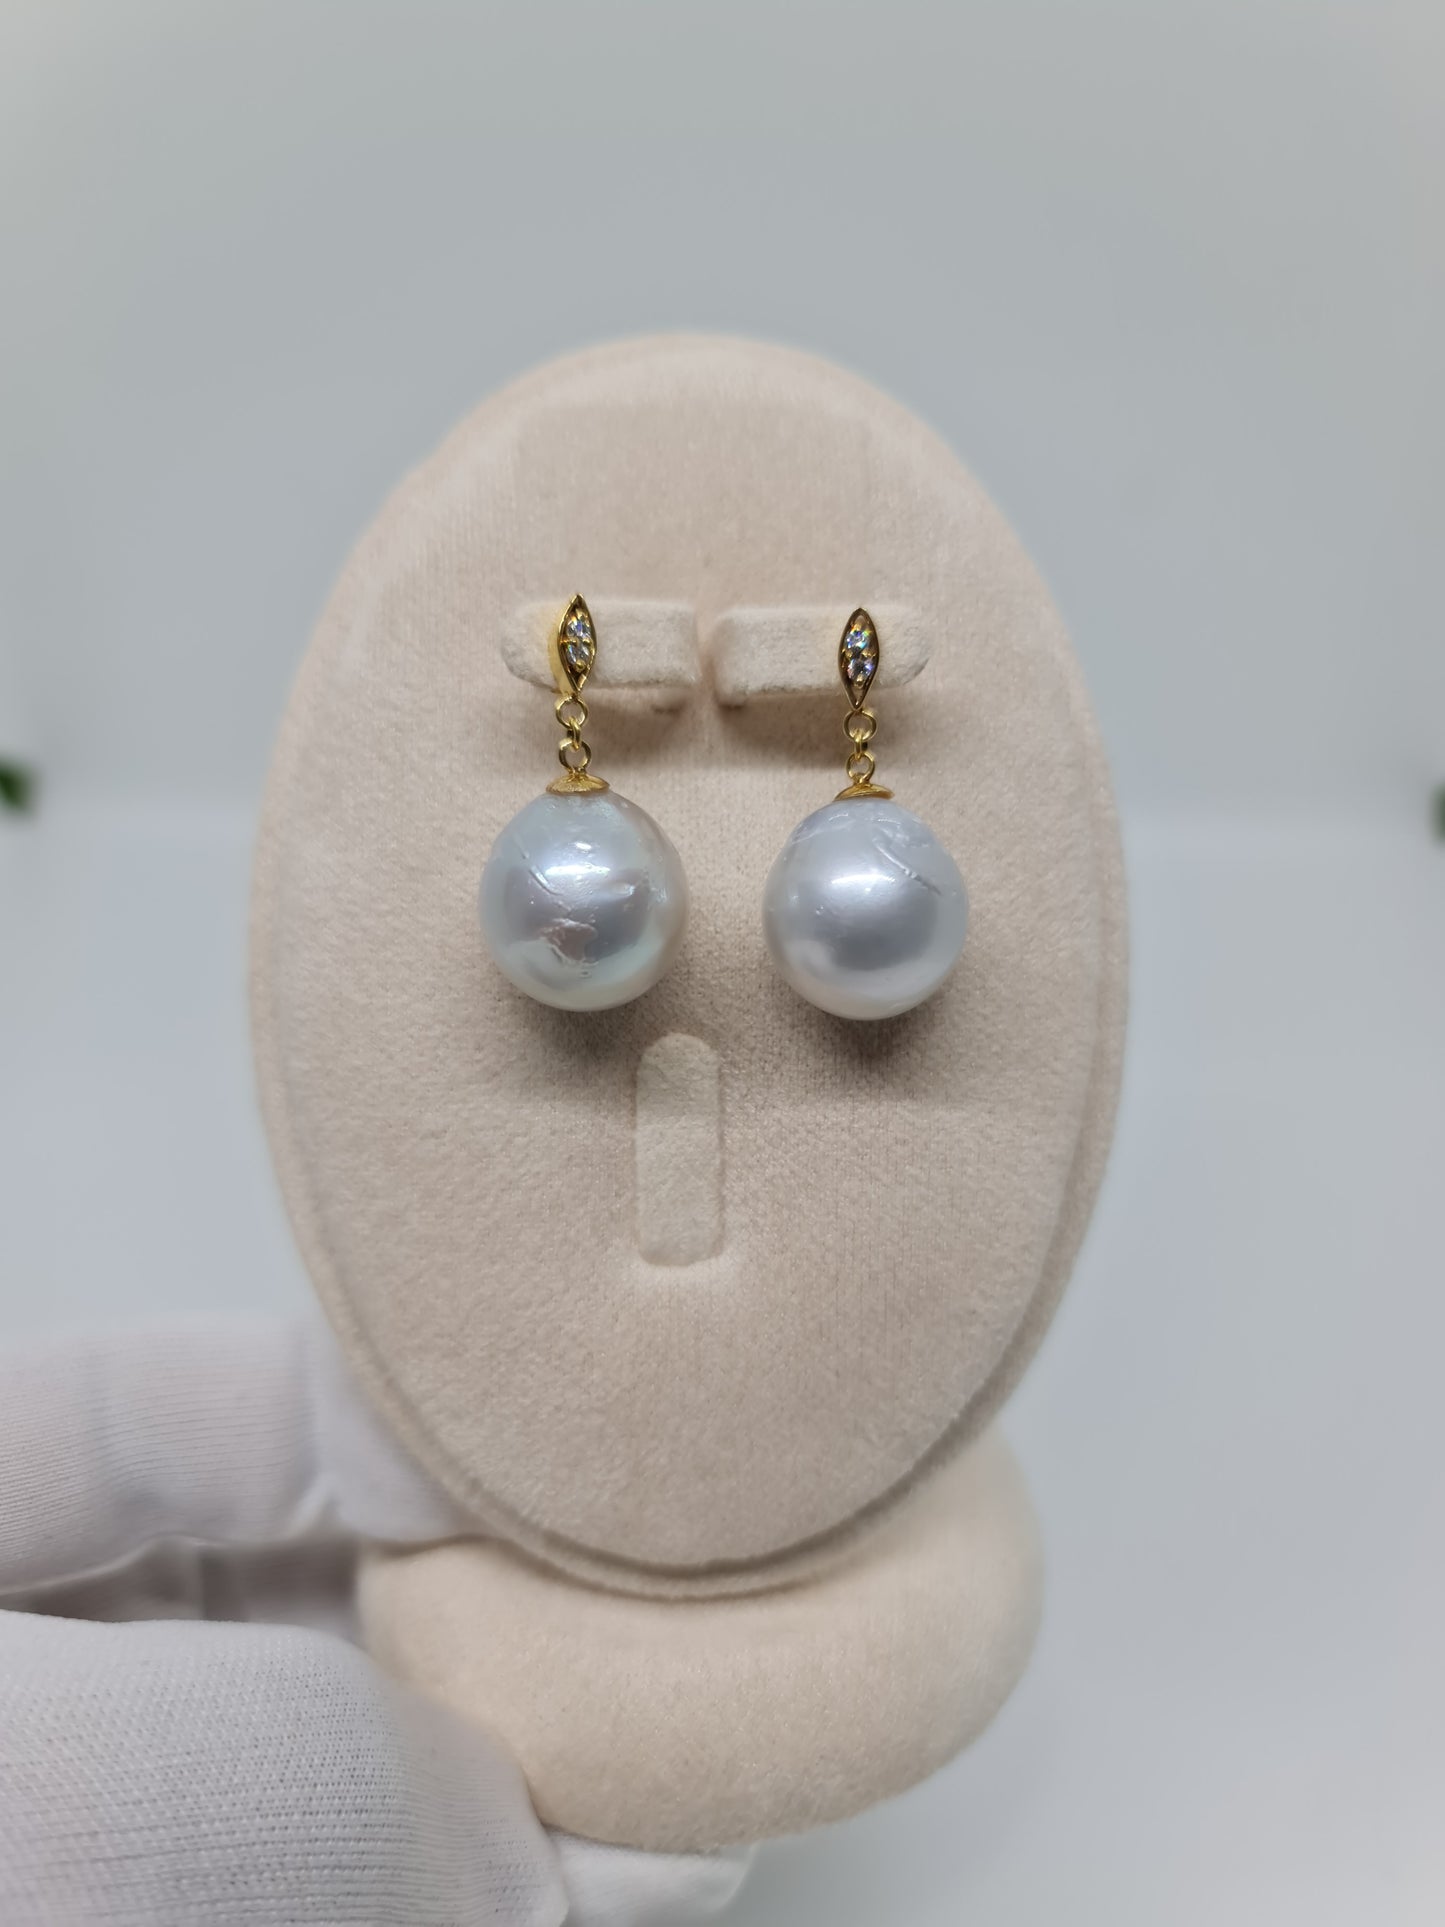 16.5mm Silver White South Sea Pearls Earrings 14K with Diamond Big Pearls